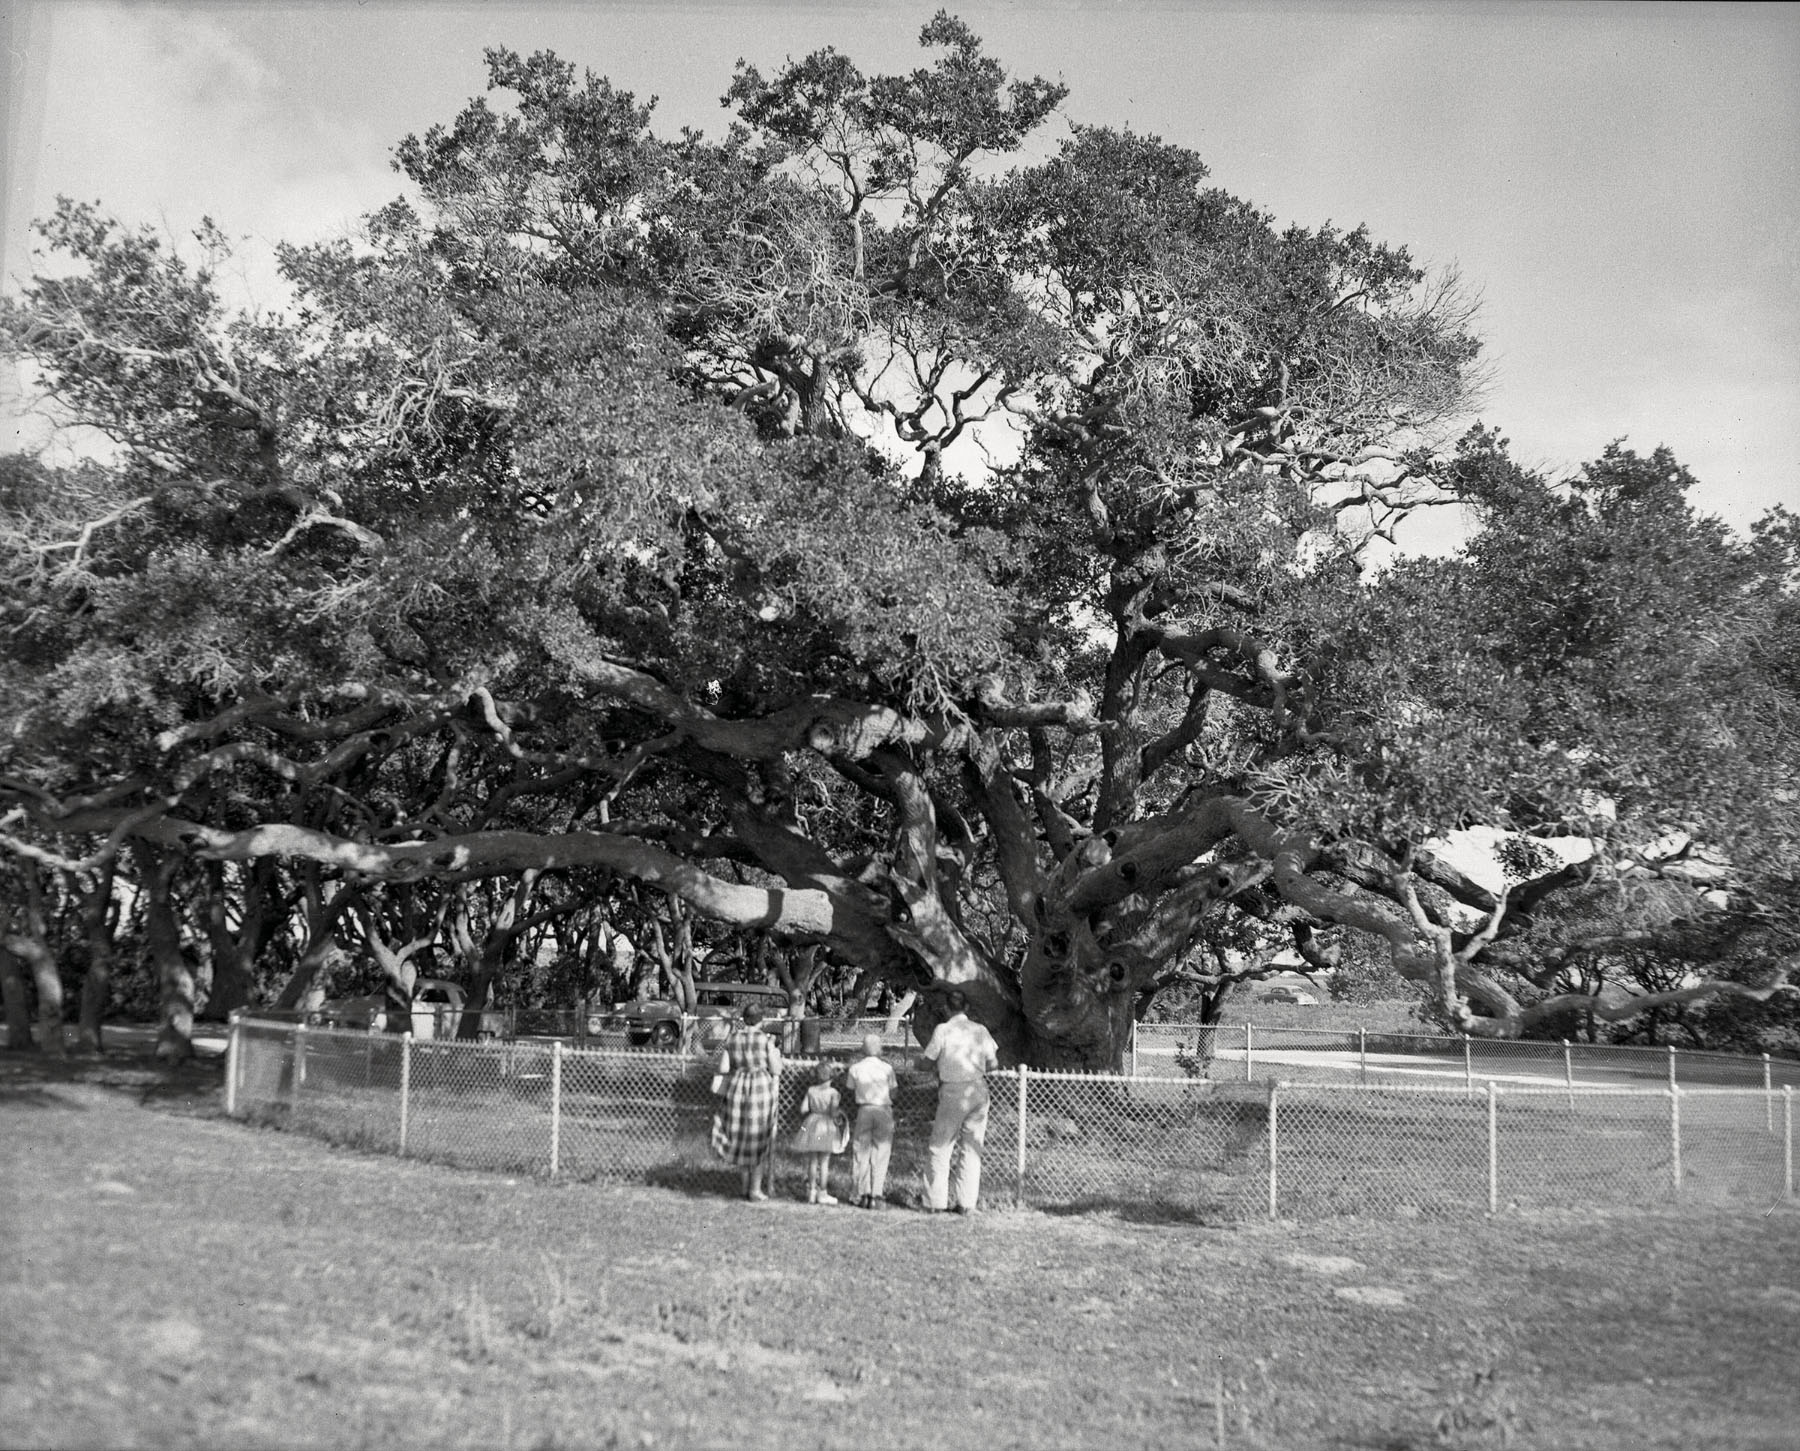 A small group of people standing at the base of a large tree